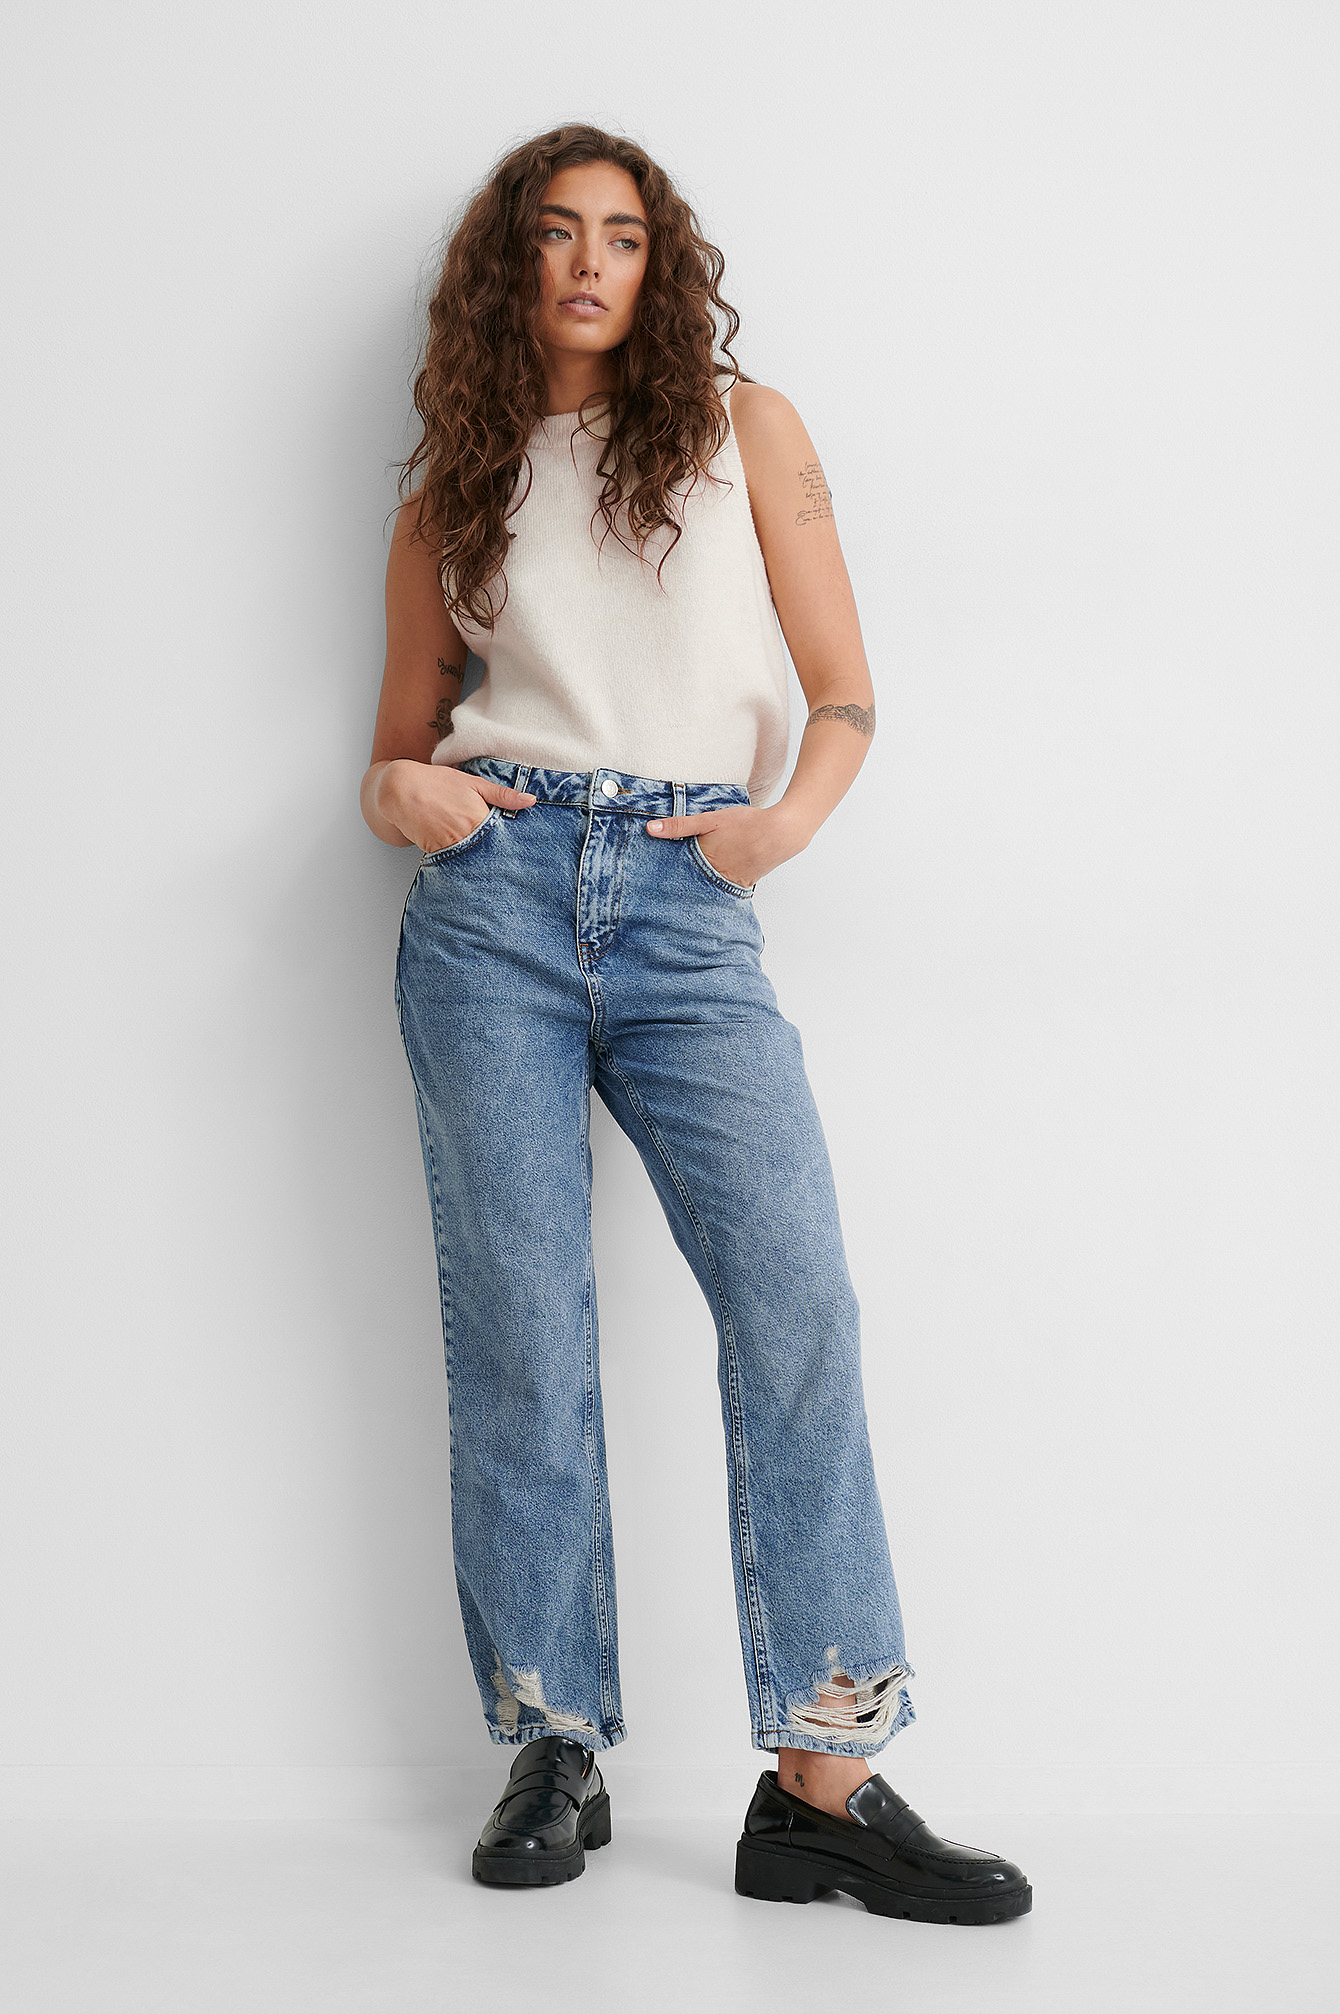 Ripped Hem Straight High Waist Jeans Outfit.